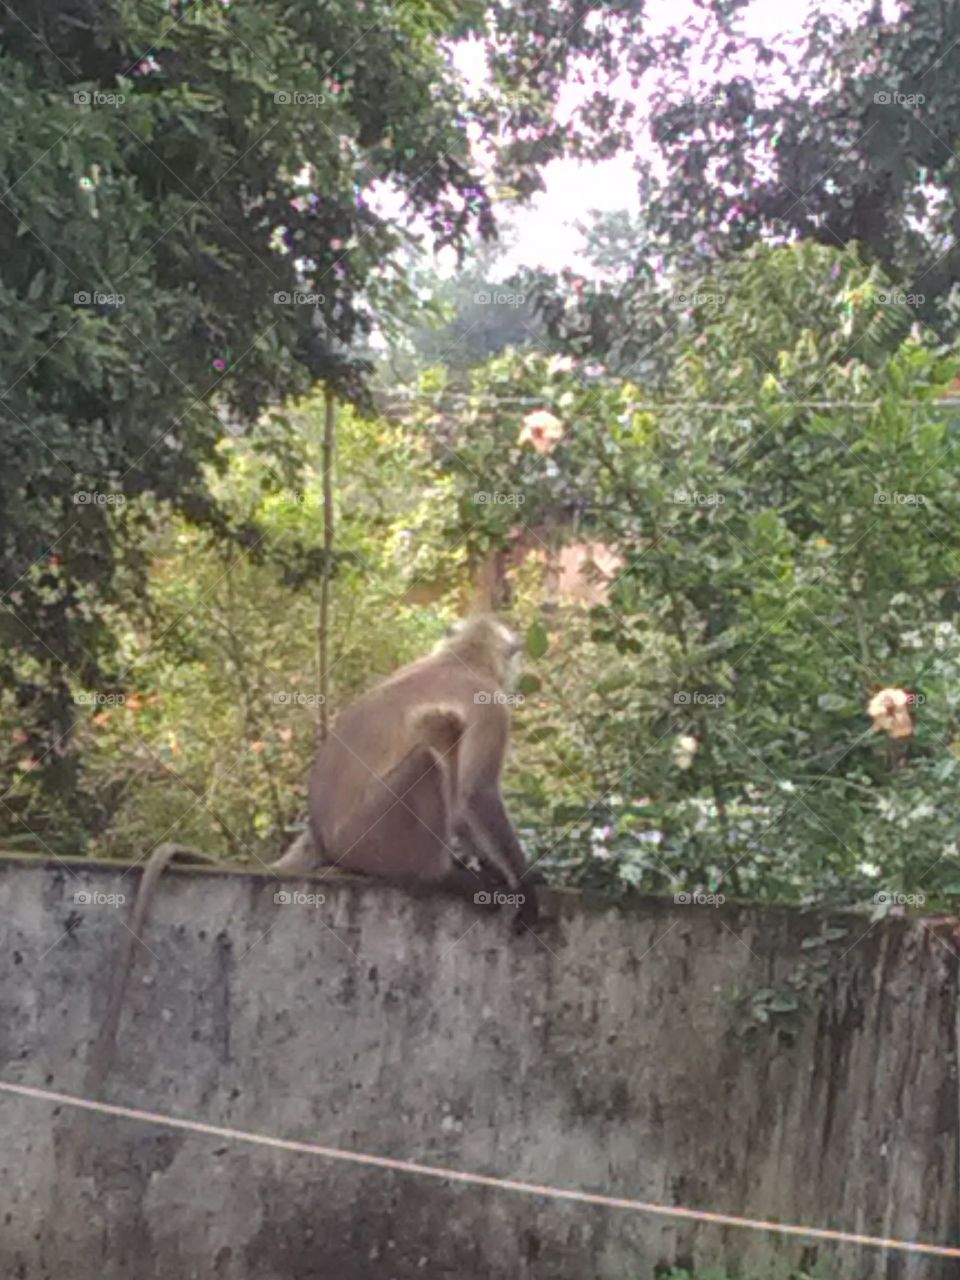 These monkeys are very playful in nature and they come towards a wandering city in search of food.